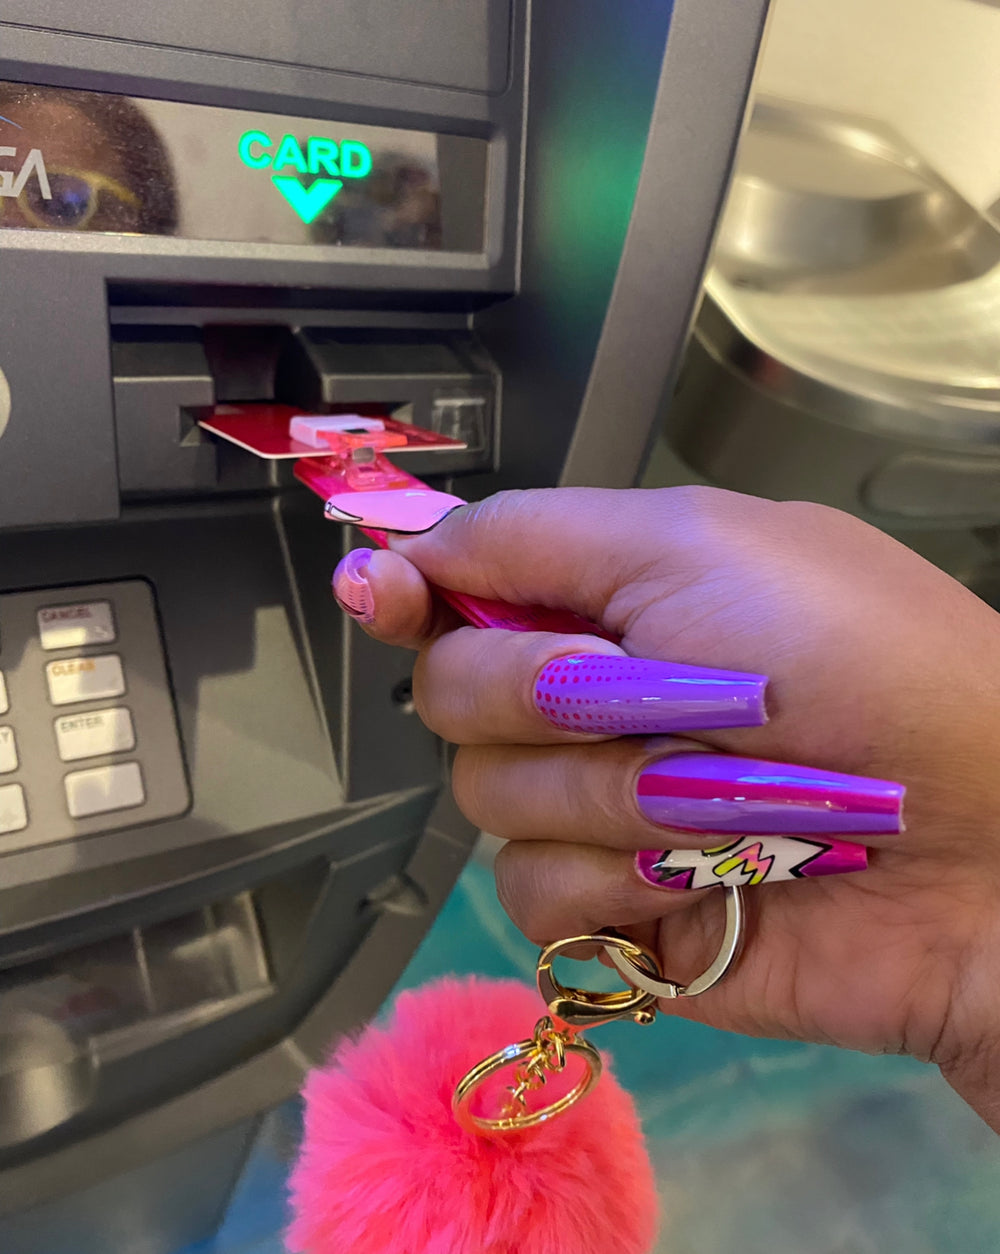 Credit Card Puller (Hot Pink Money) – Yvonne's Bomb Press-Ons